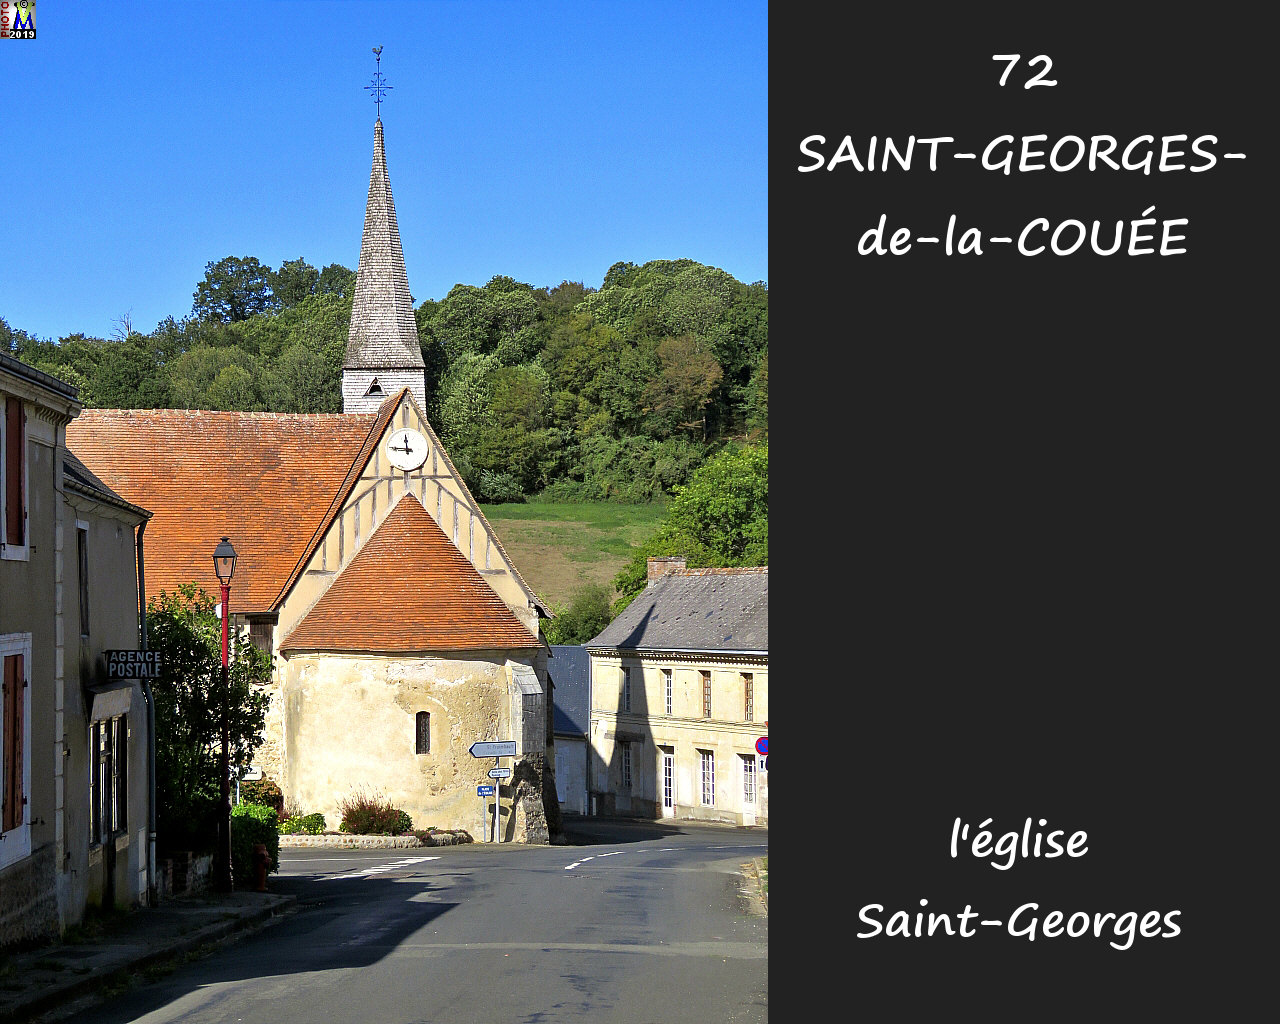 72StGEORGES-COUEE_eglise_106.jpg